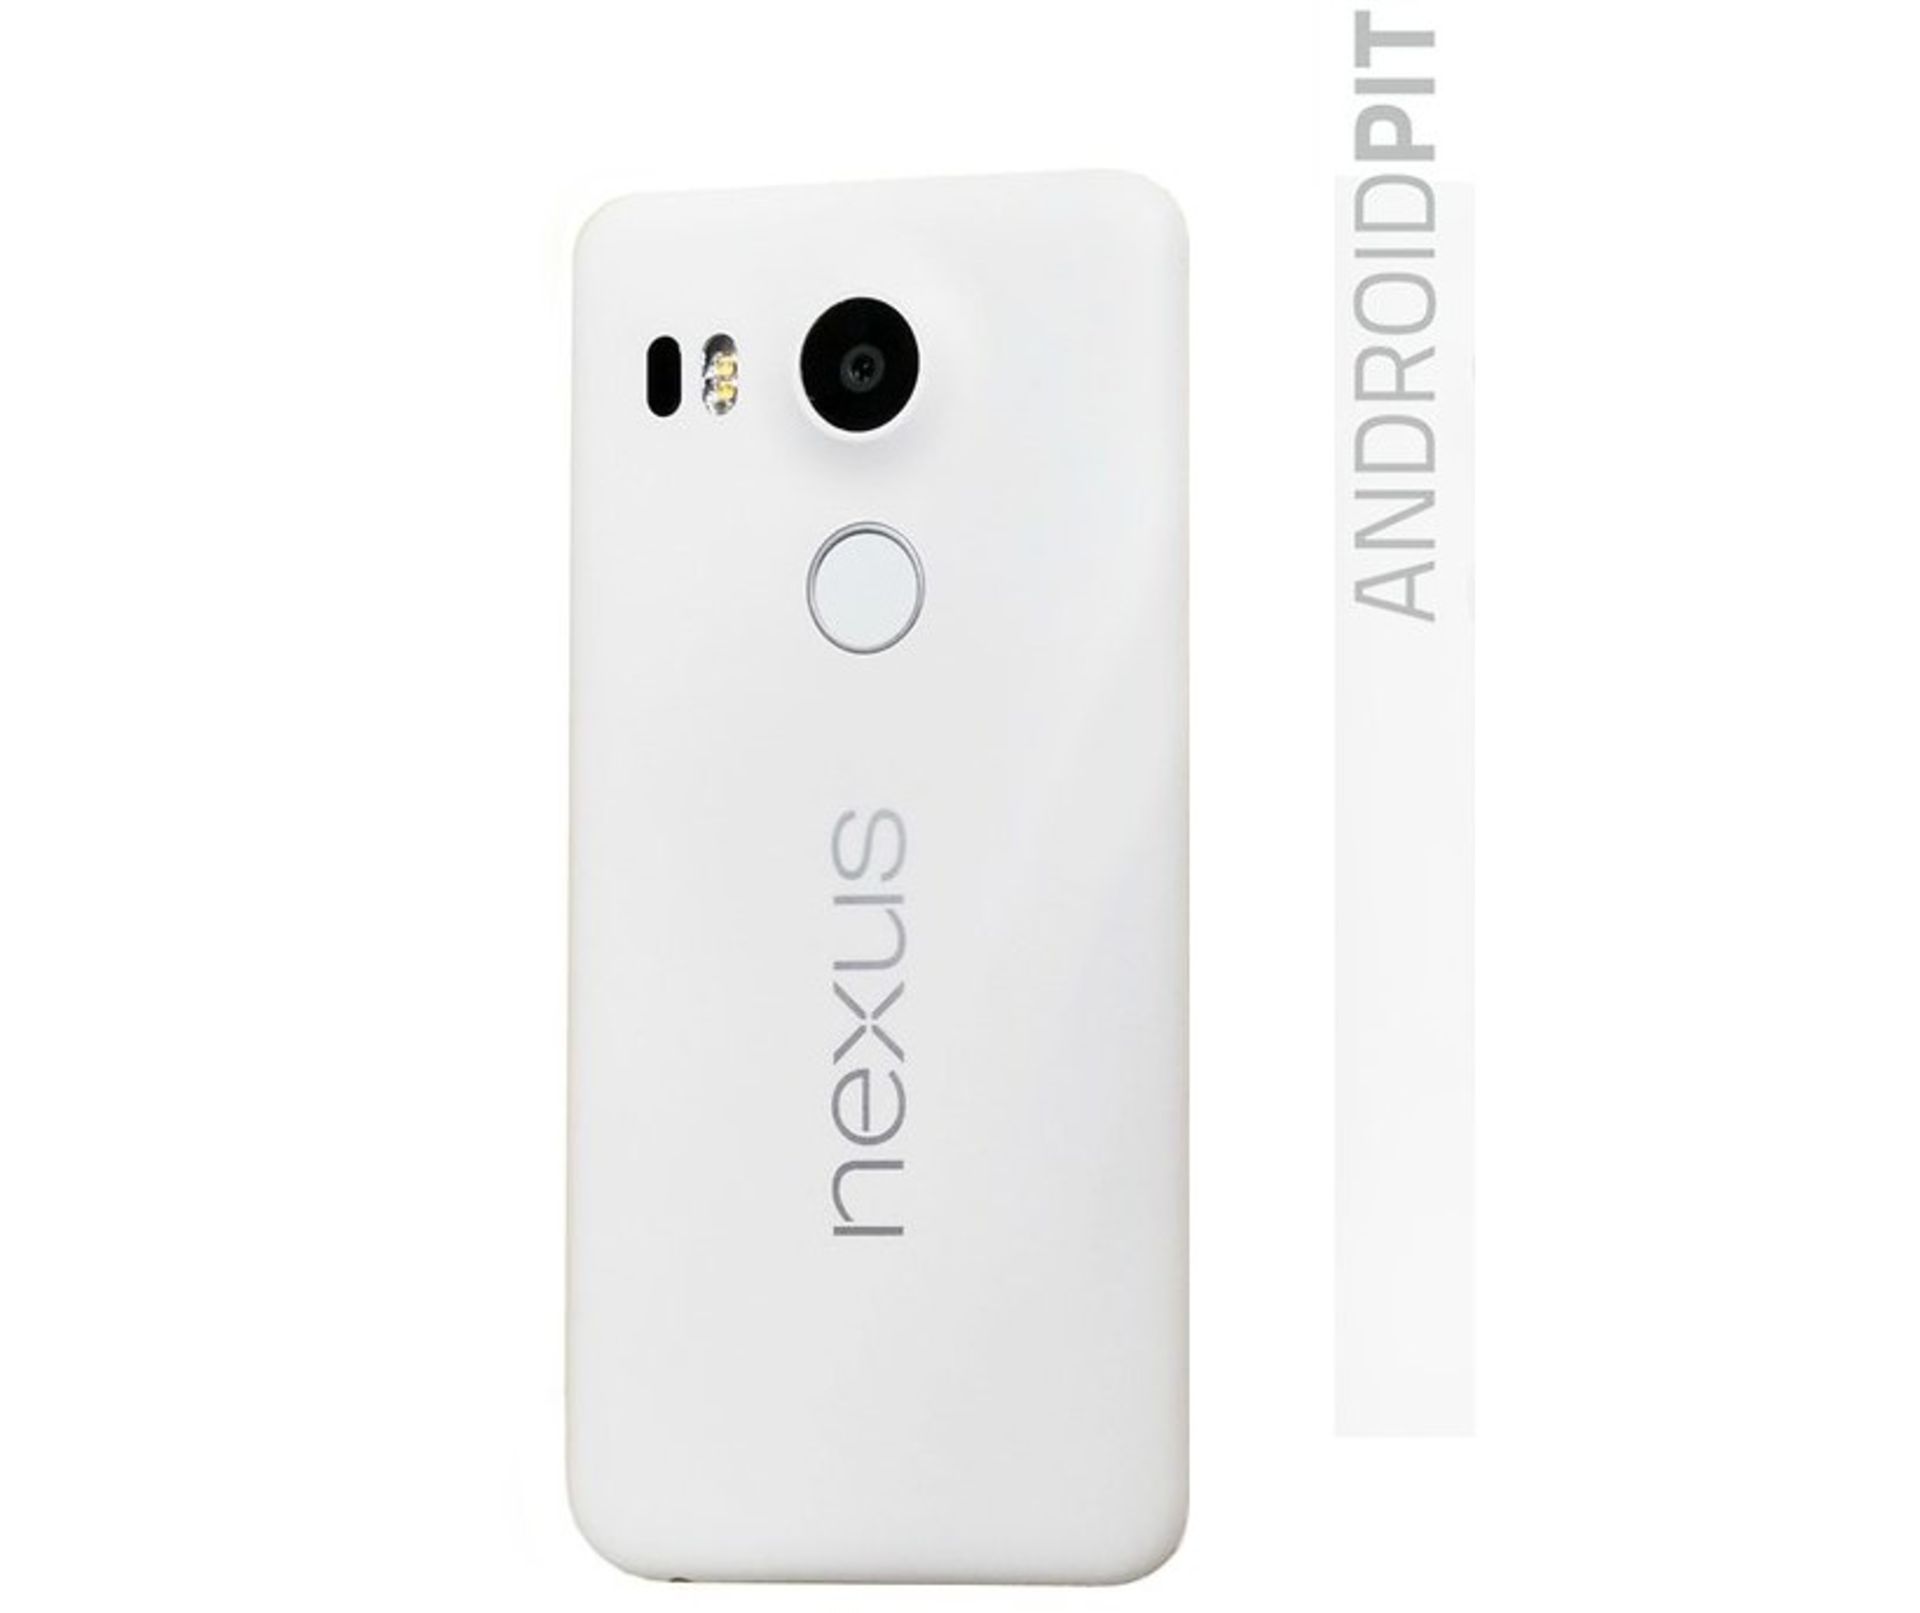 Is this the final design of the Nexus 5 201543